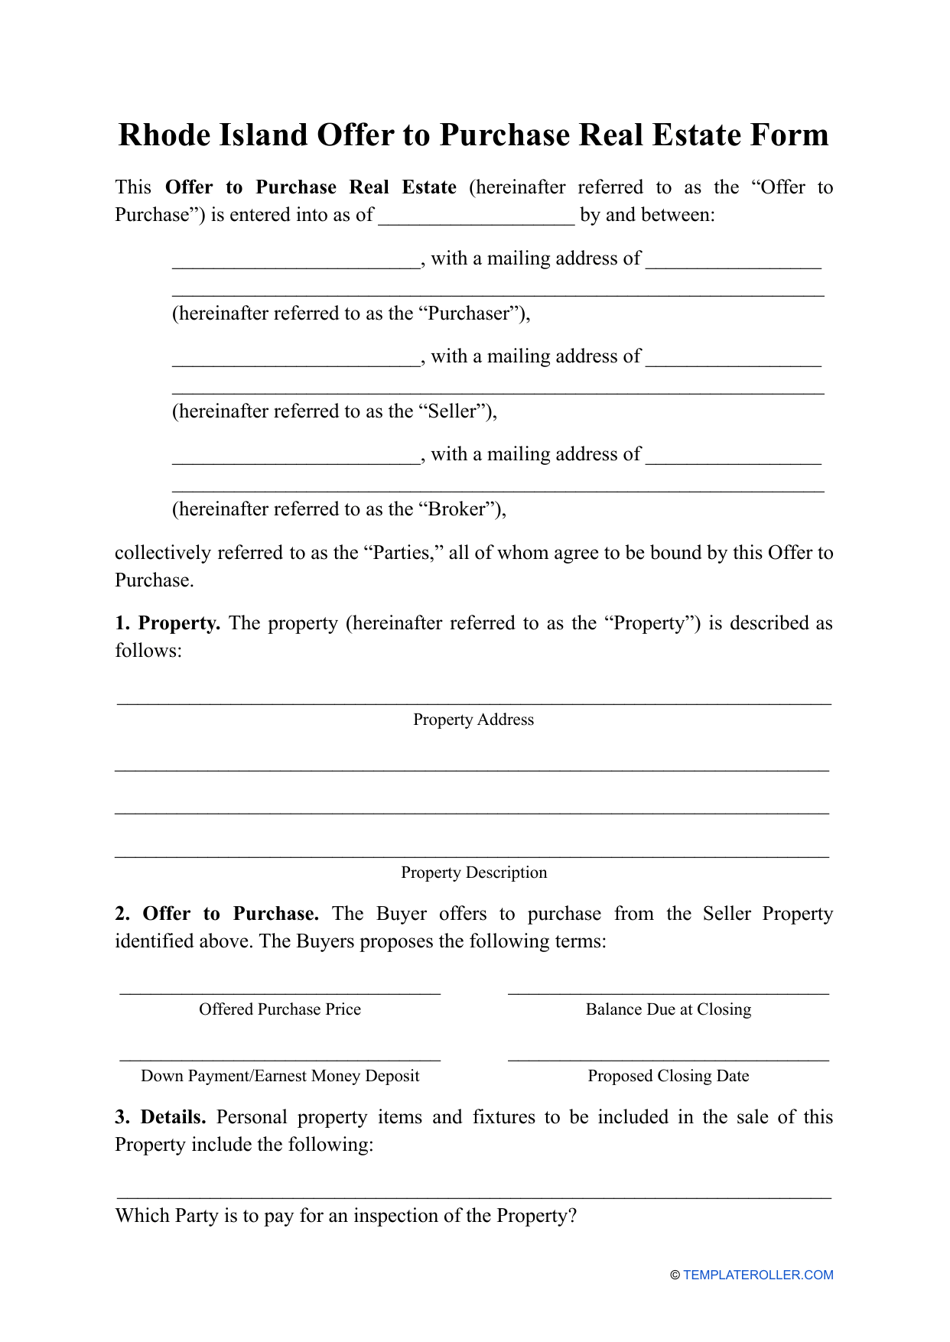 Offer to Purchase Real Estate Form - Rhode Island, Page 1